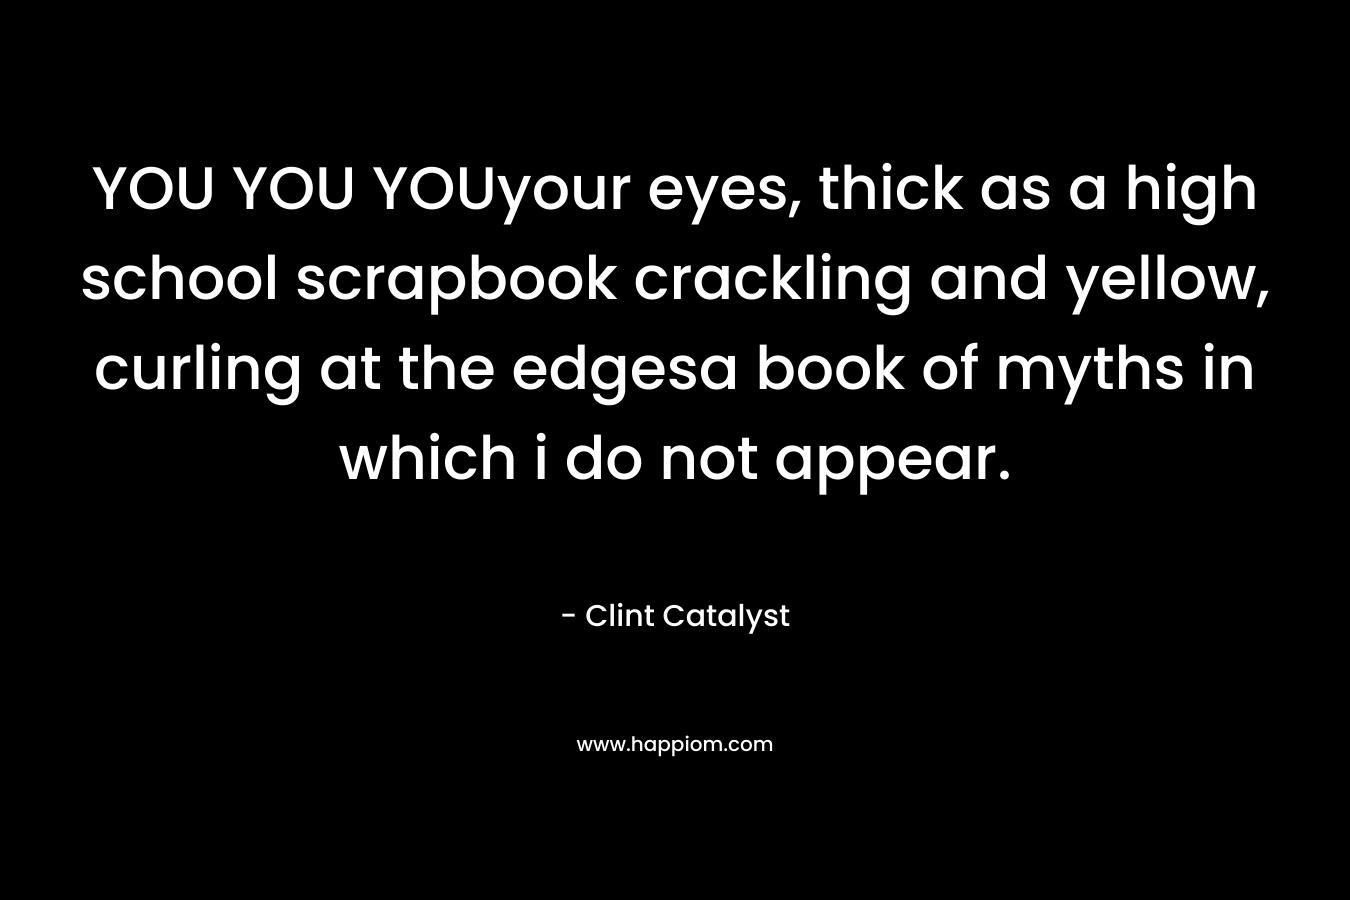 YOU YOU YOUyour eyes, thick as a high school scrapbook crackling and yellow, curling at the edgesa book of myths in which i do not appear. – Clint Catalyst